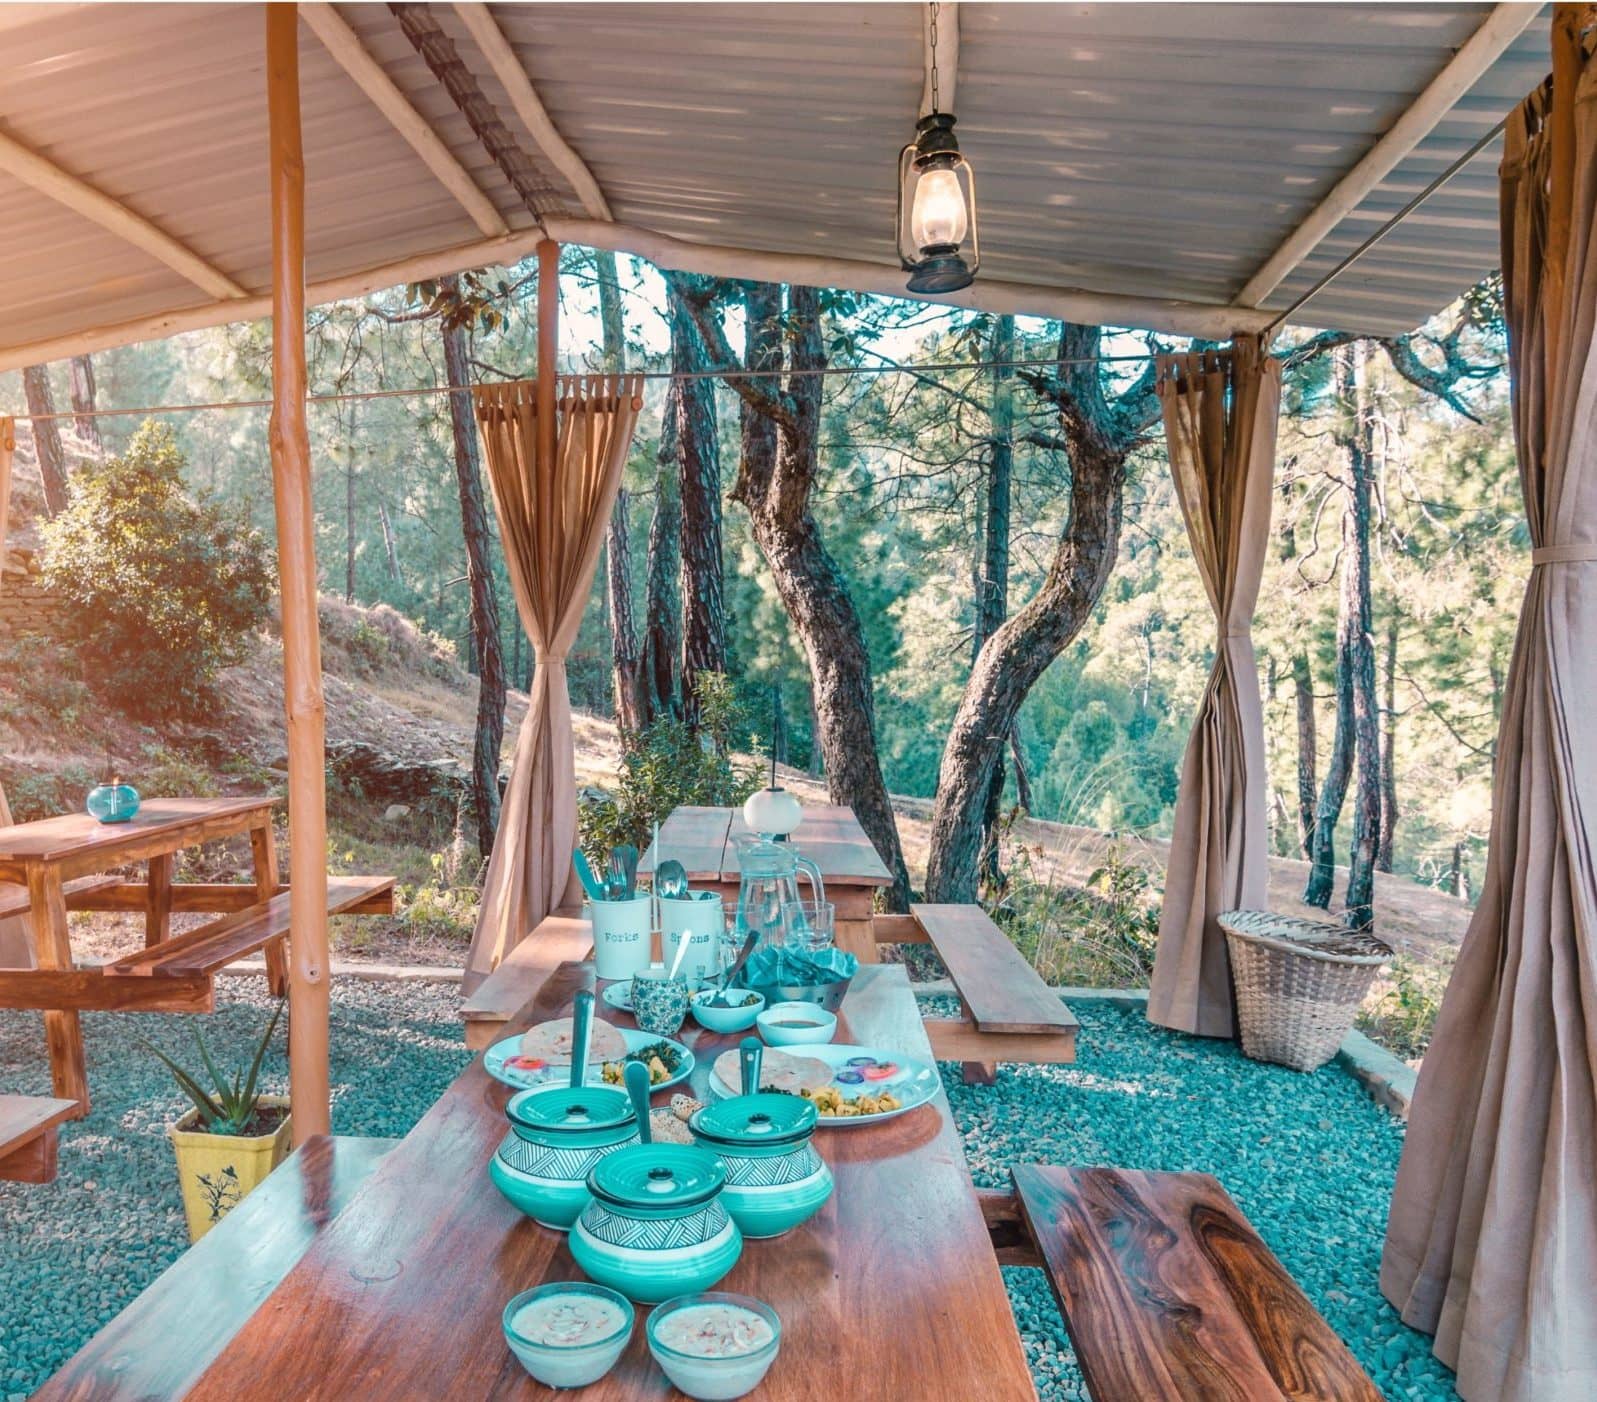 Dining area at Nayalap - a boutique glamping place in Kumaon